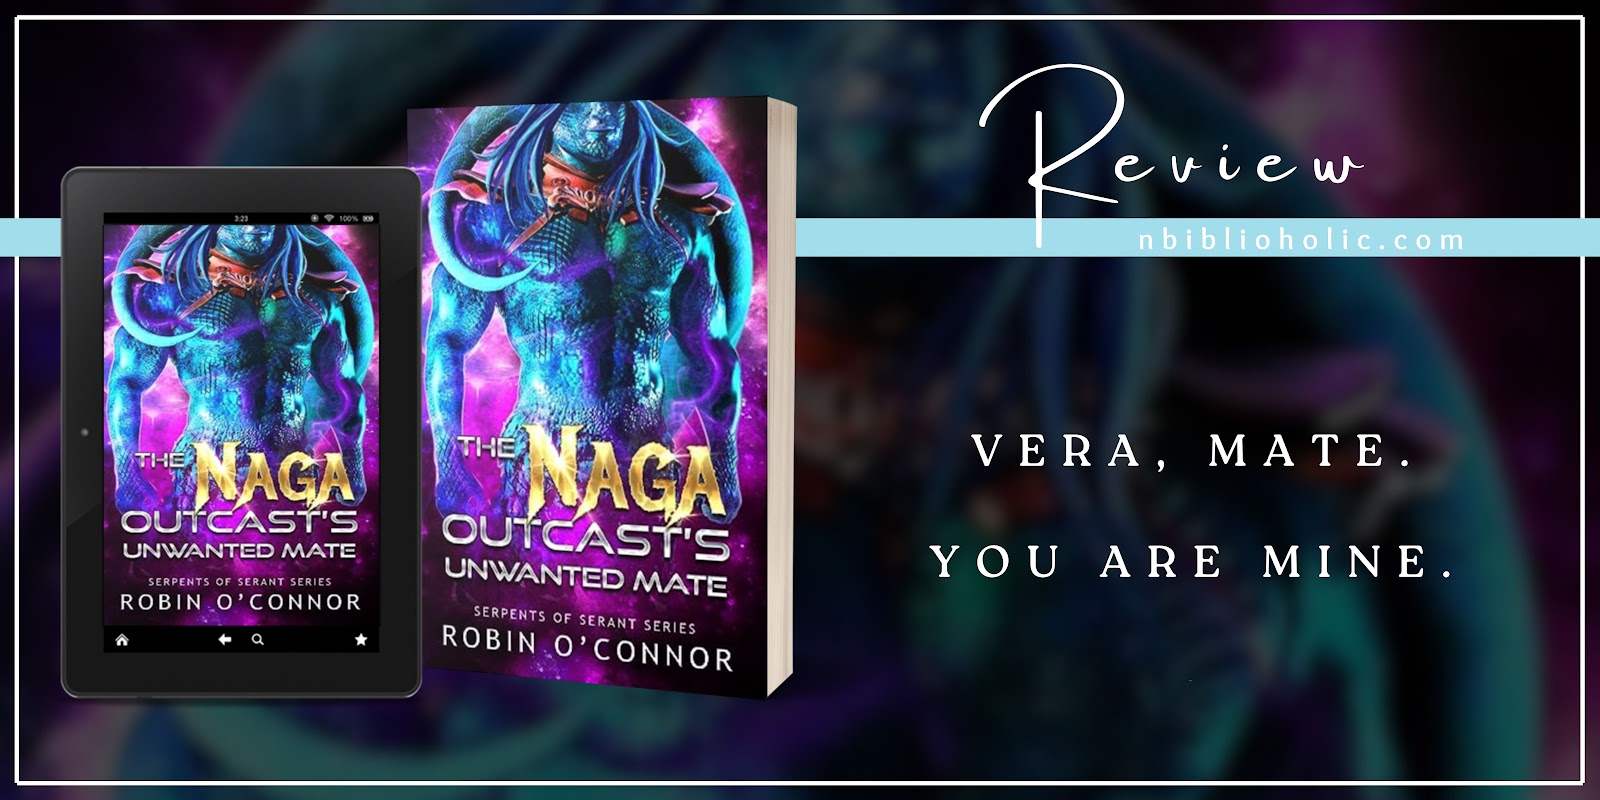 The Naga Outcast's Unwanted Mate by Robin O'Connor